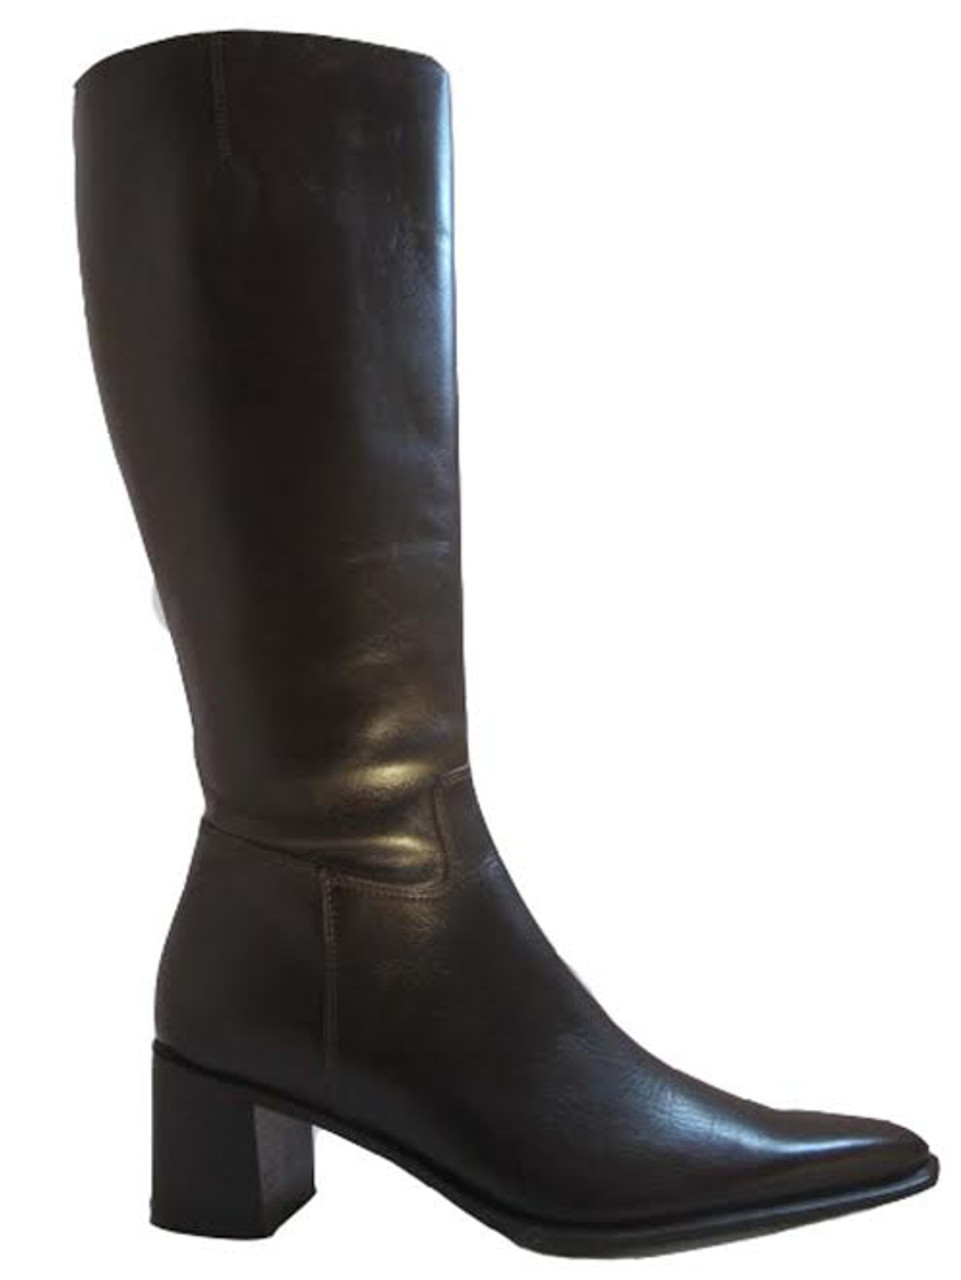 female knee high boots